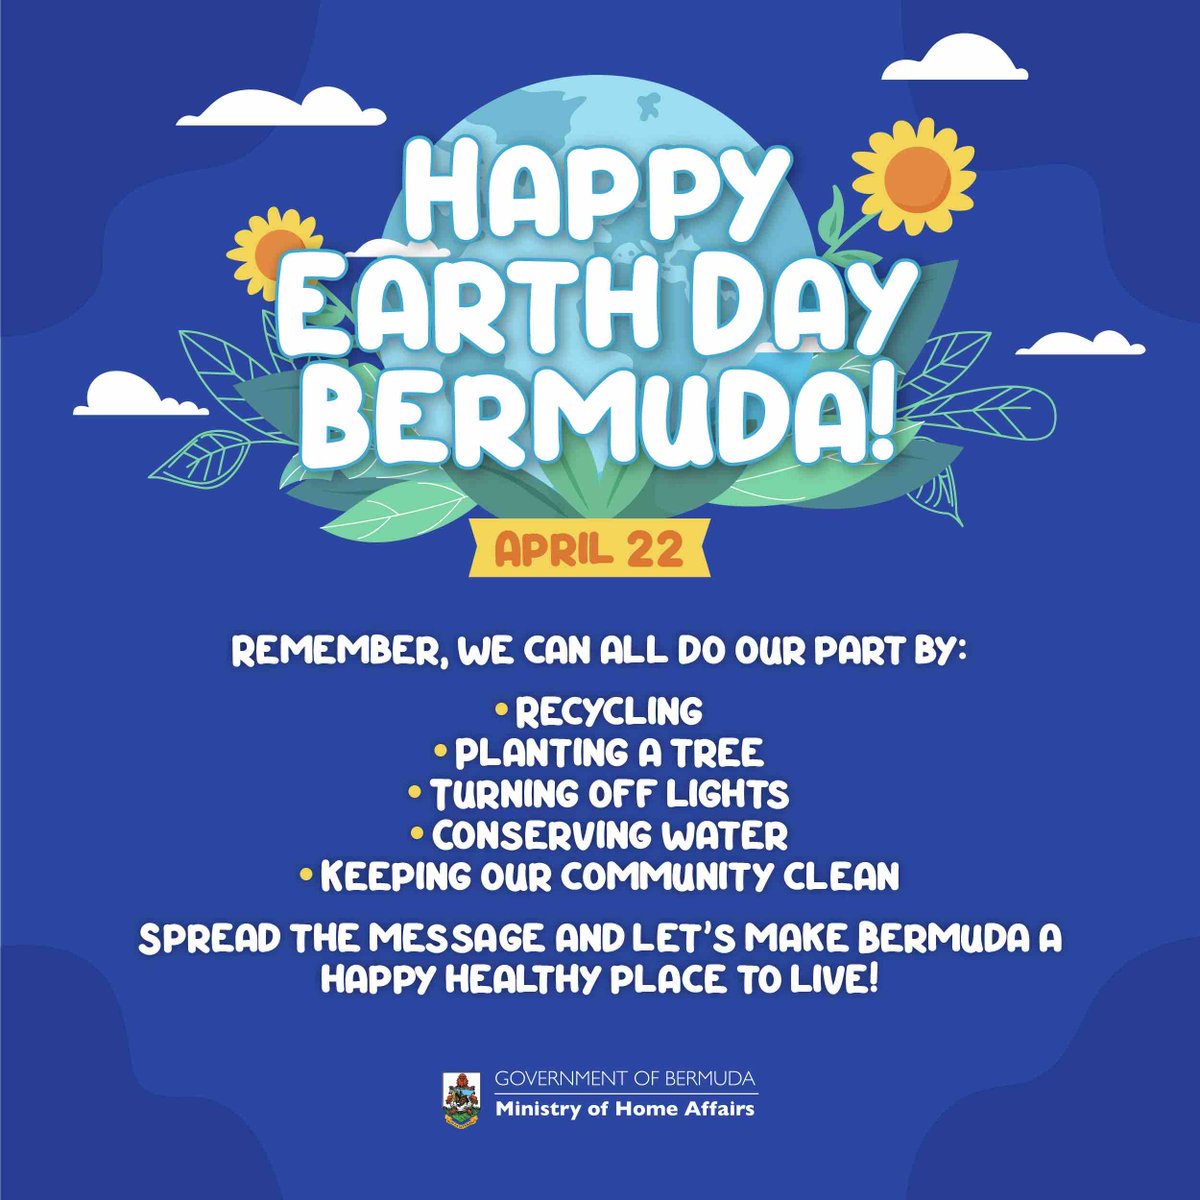 Happy Earth Day Bermuda! 🇧🇲 Let’s celebrate our island’s natural wonders and commit to preserving them for generations to come. Together, we can make a difference!